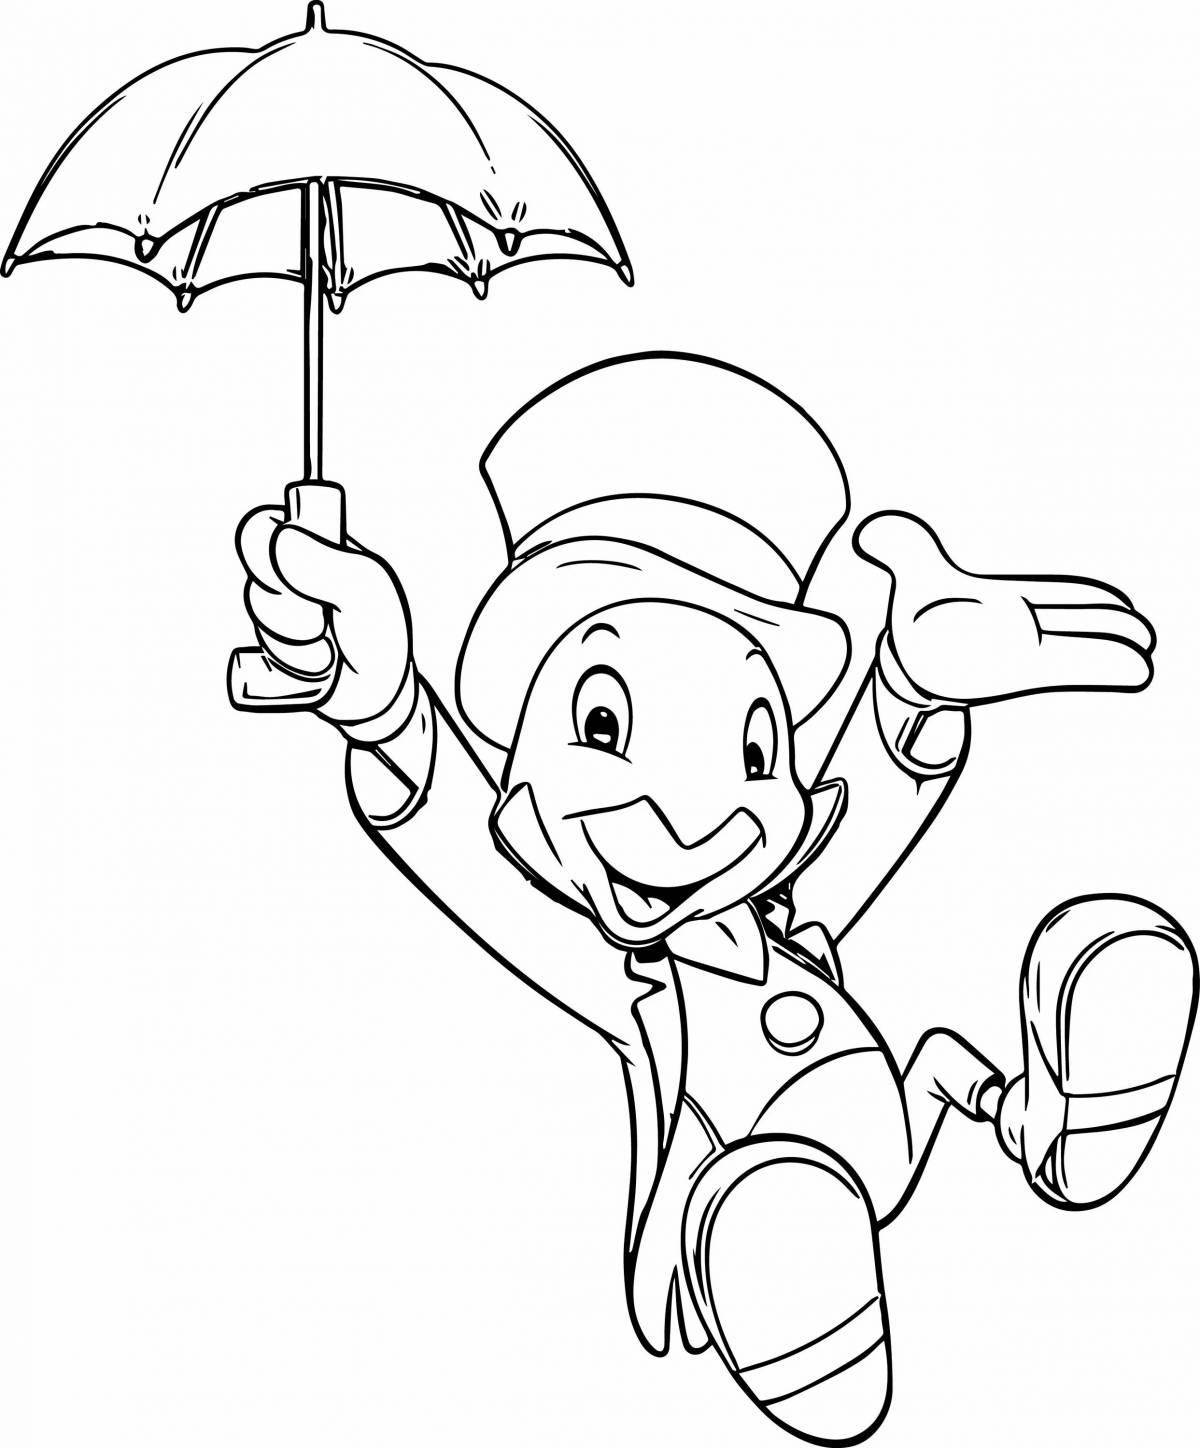 Delightful pinocchio coloring book for kids